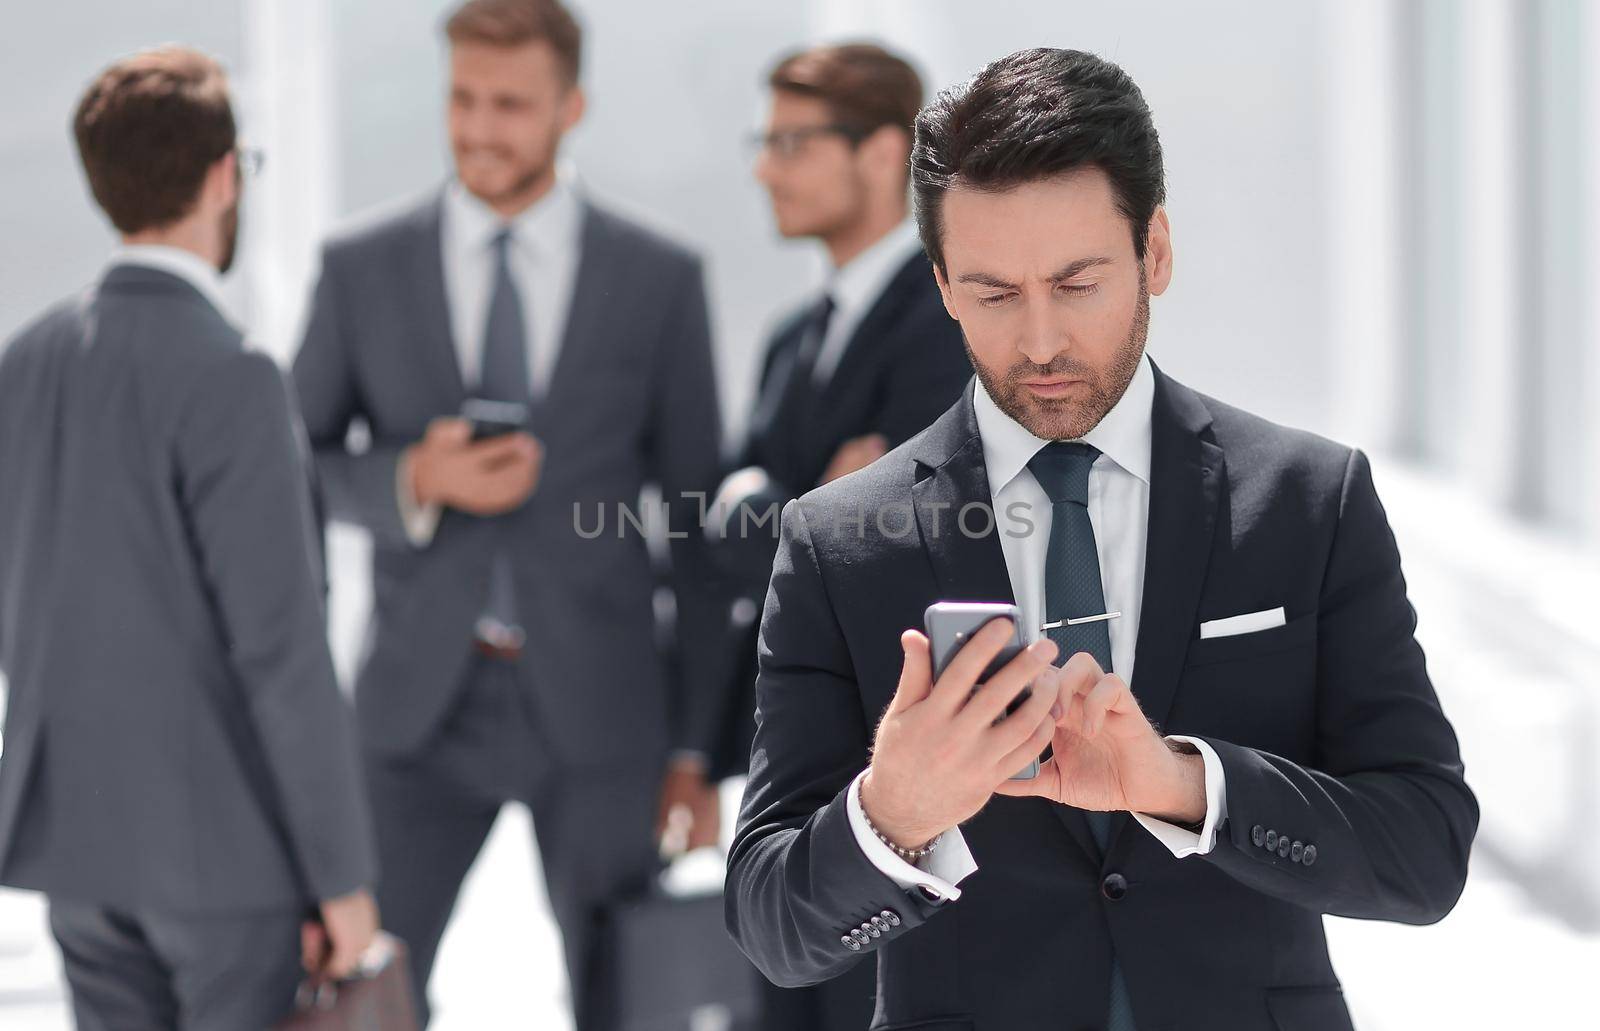 businessman reading text on smartphone by asdf